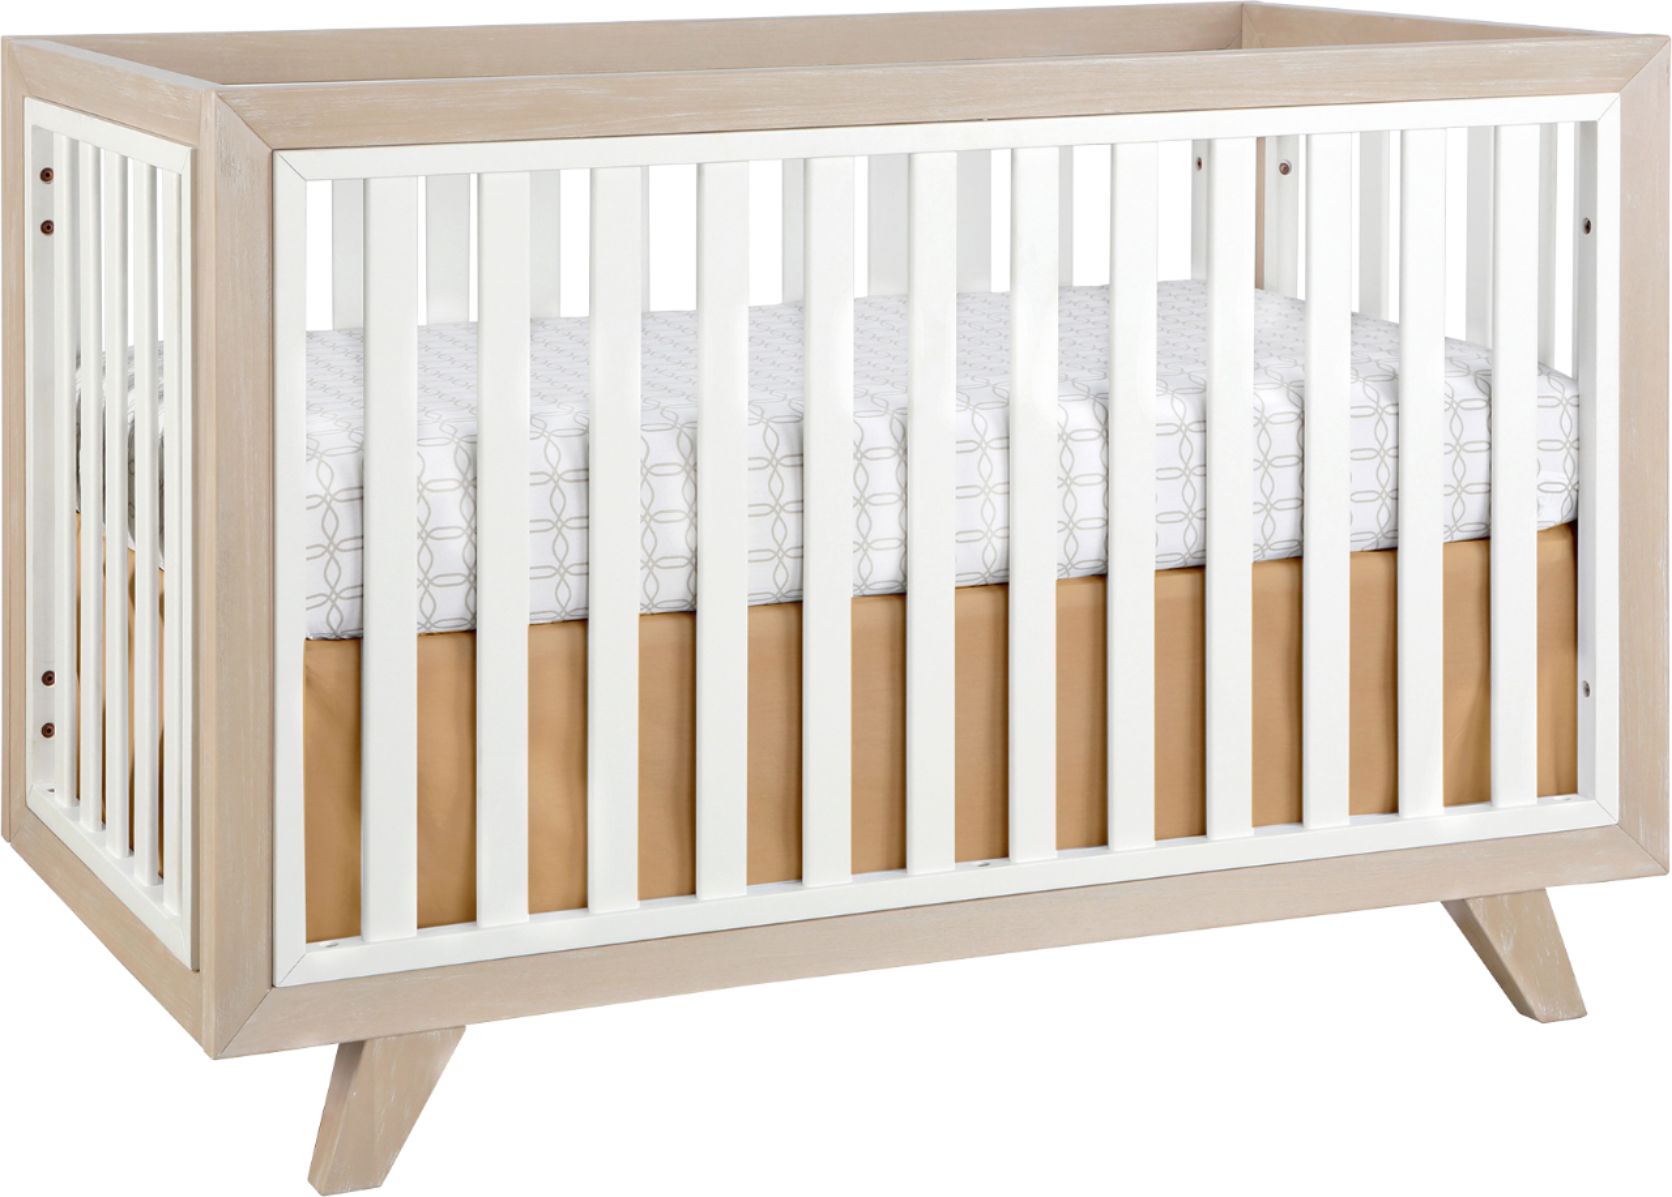 Angle View: Karla Dubois - Wooster Convertible Crib - Almond/White